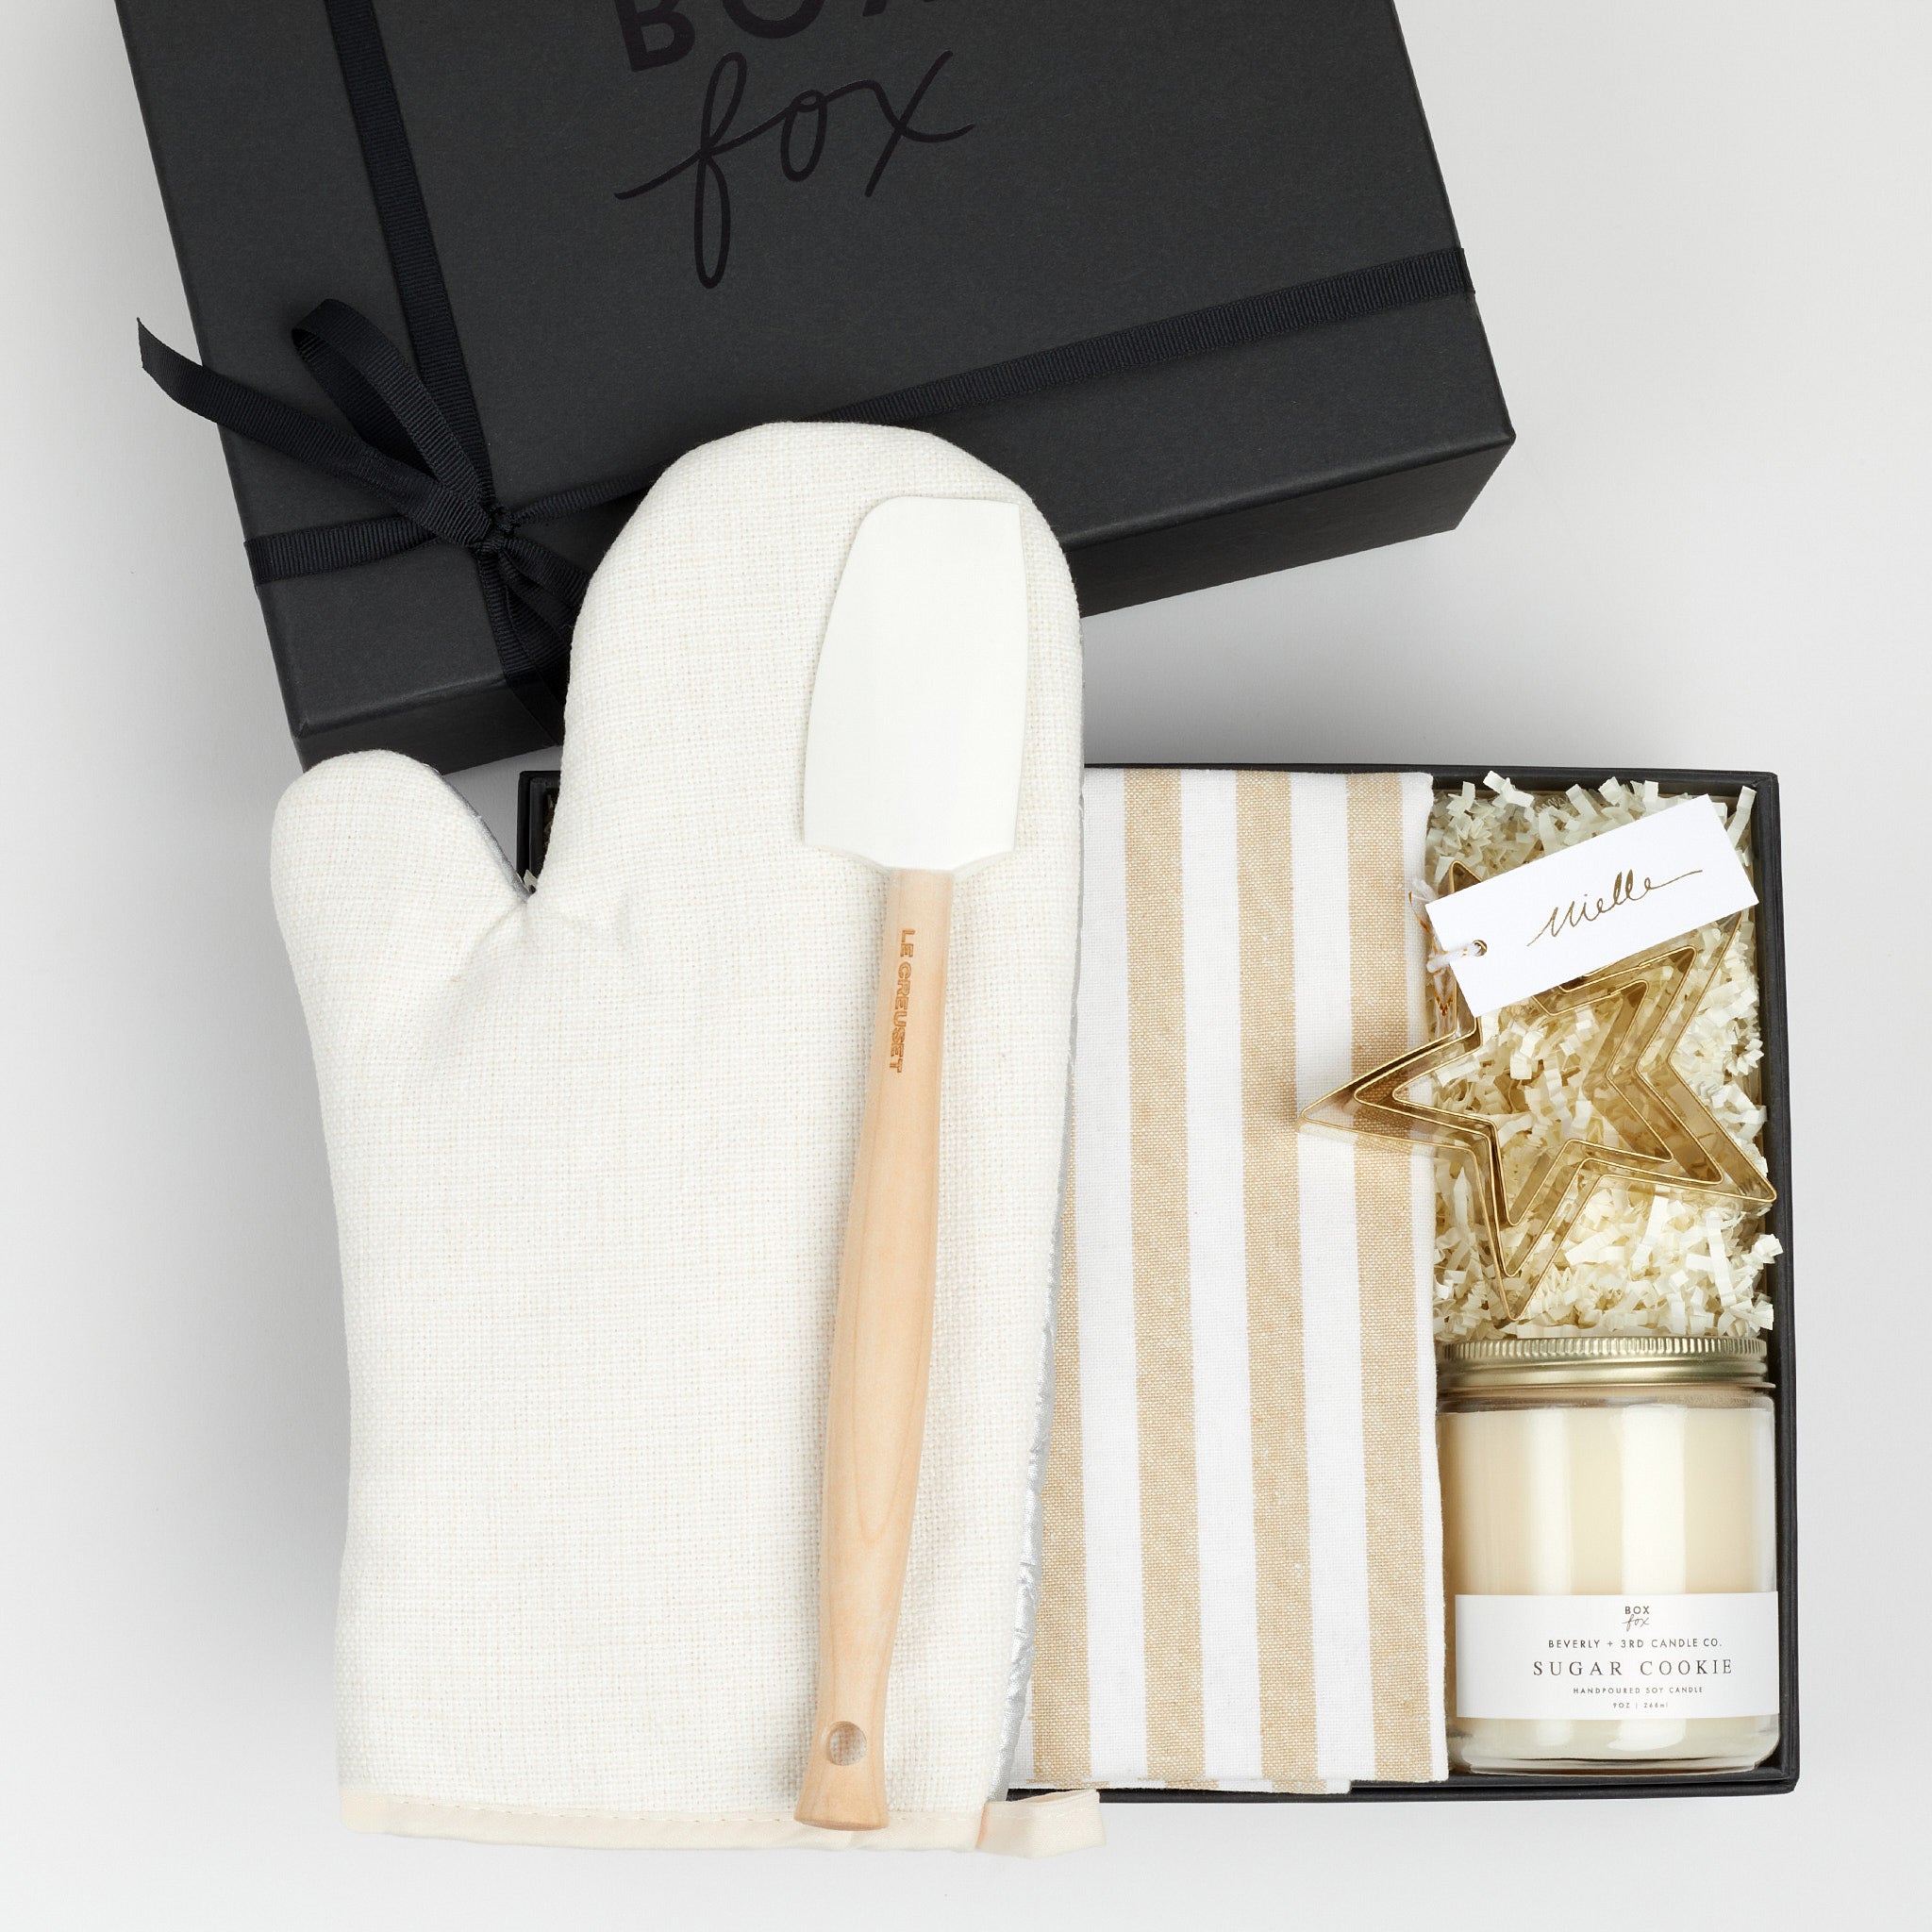 The BAKING box in black, which includes an oven mitt, spatula, striped dish towel, cookie cutters and a sugar cookie candle.